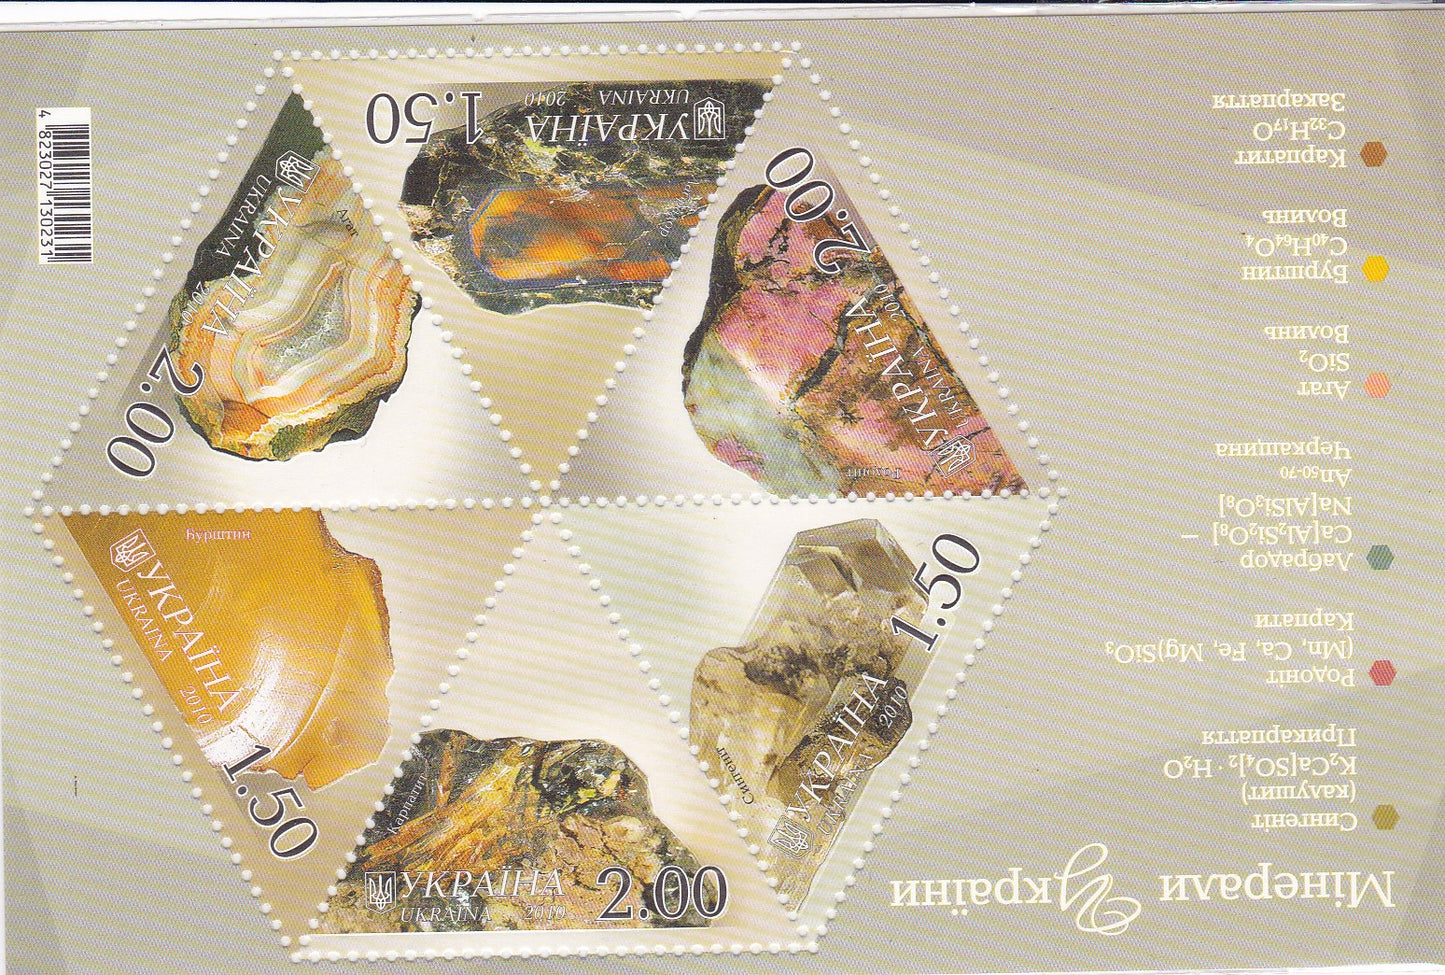 Ukraine holographic ms with 6 Triangle shining stamps.